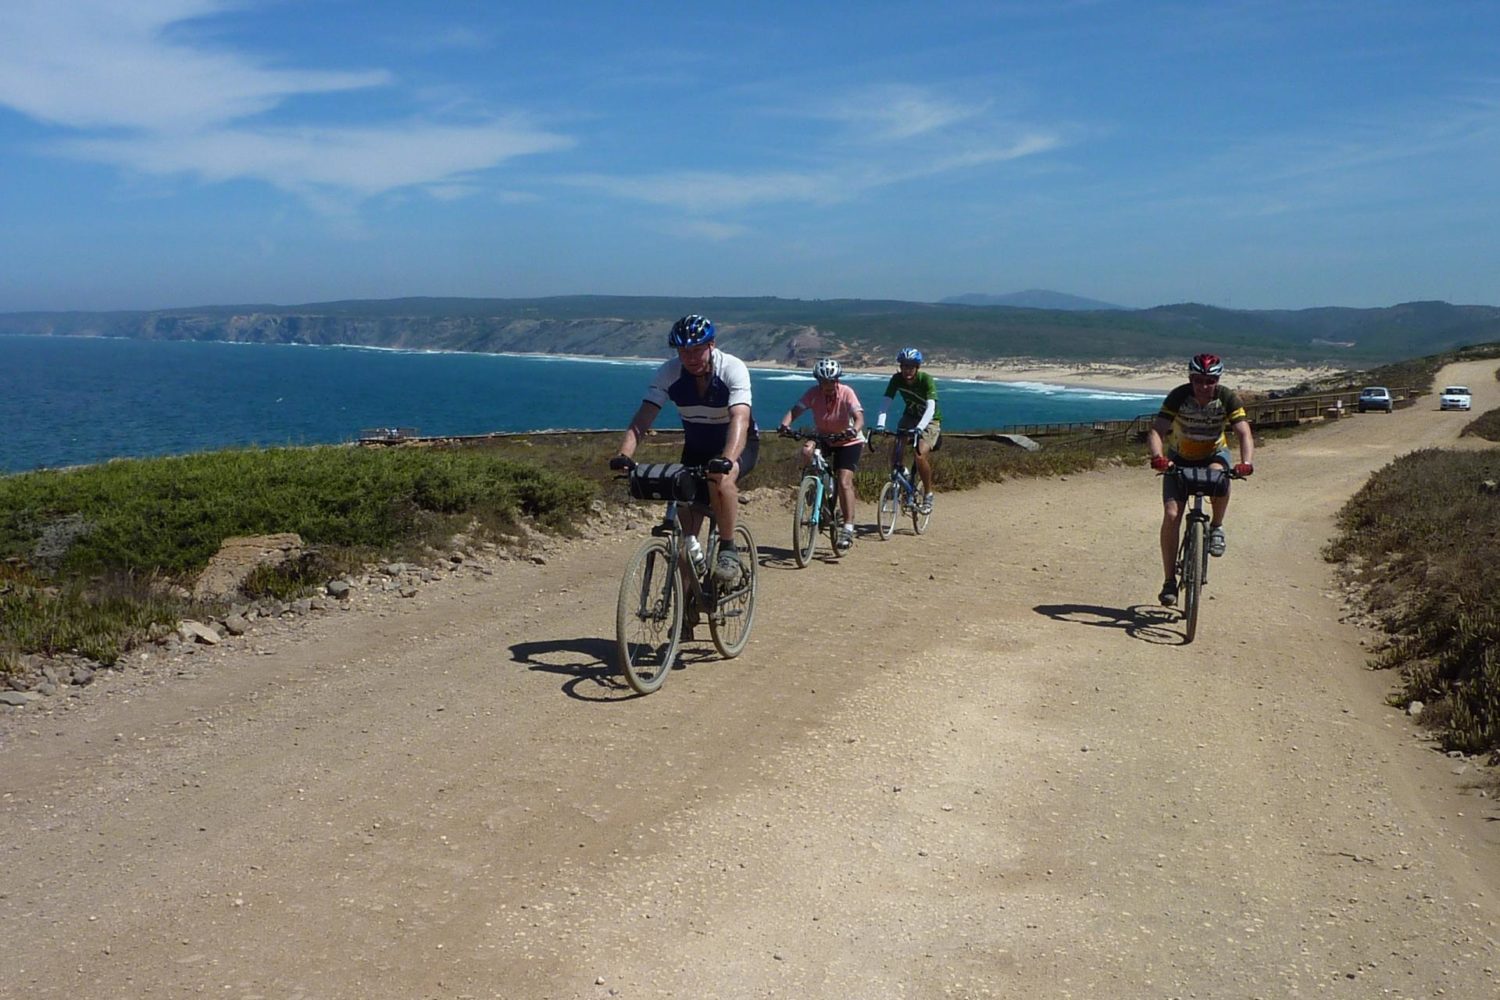 Self guided cycling tour of Portugal's Atlantic coast